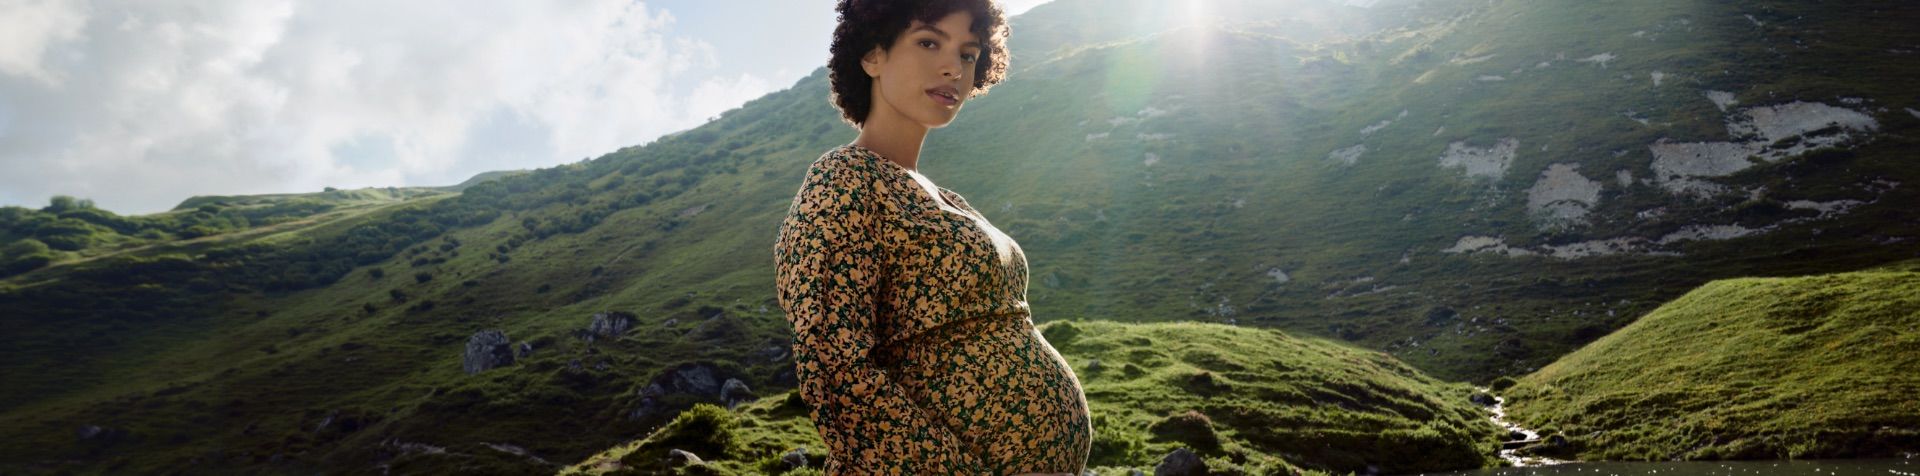 A pregnant woman in a yellow dress with a flowery print stands in front of mountains with the sun peeking through the clouds. 